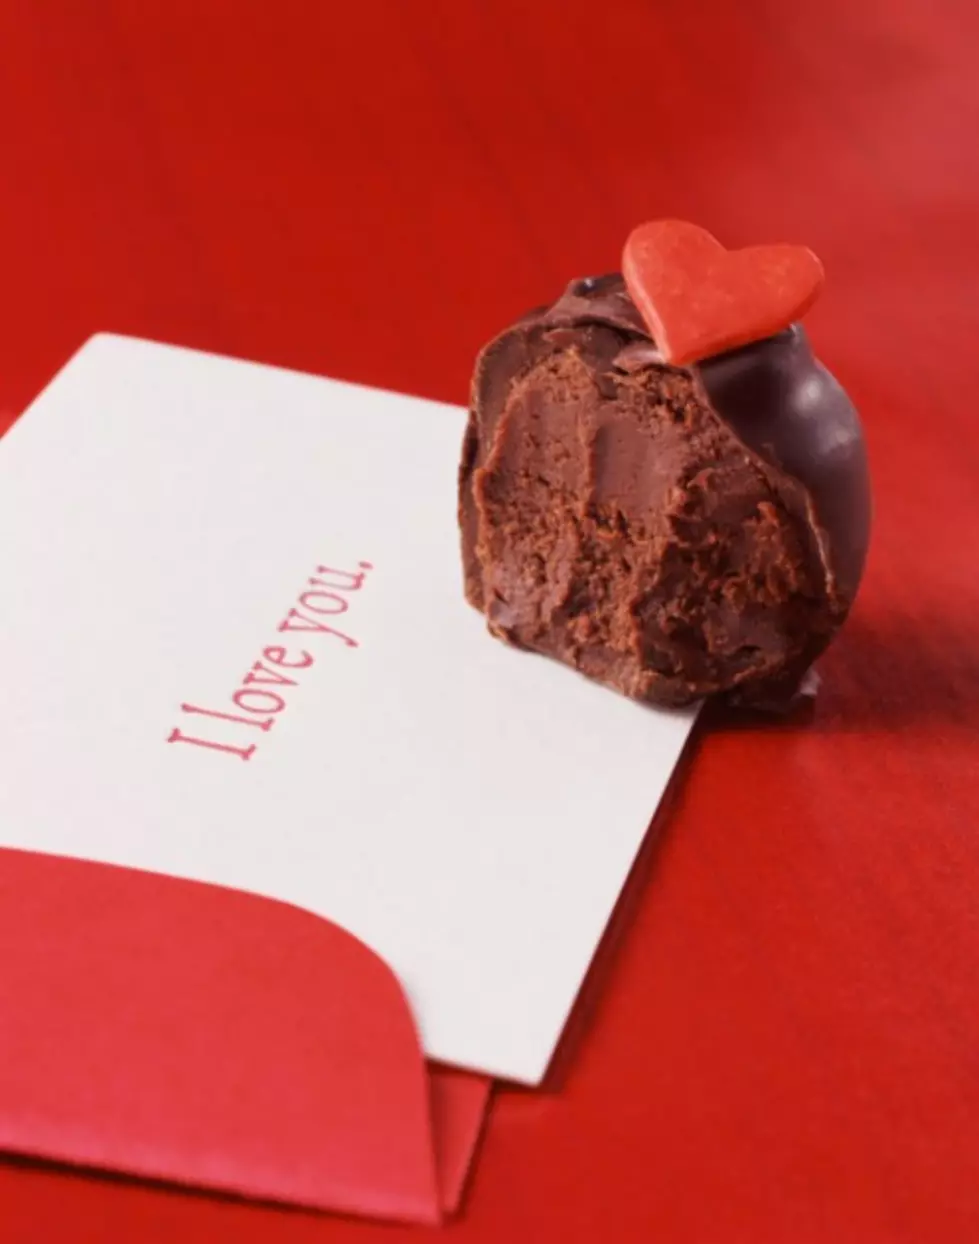 Chocolate Flavored Envelopes May Be THE Best Invention Ever!